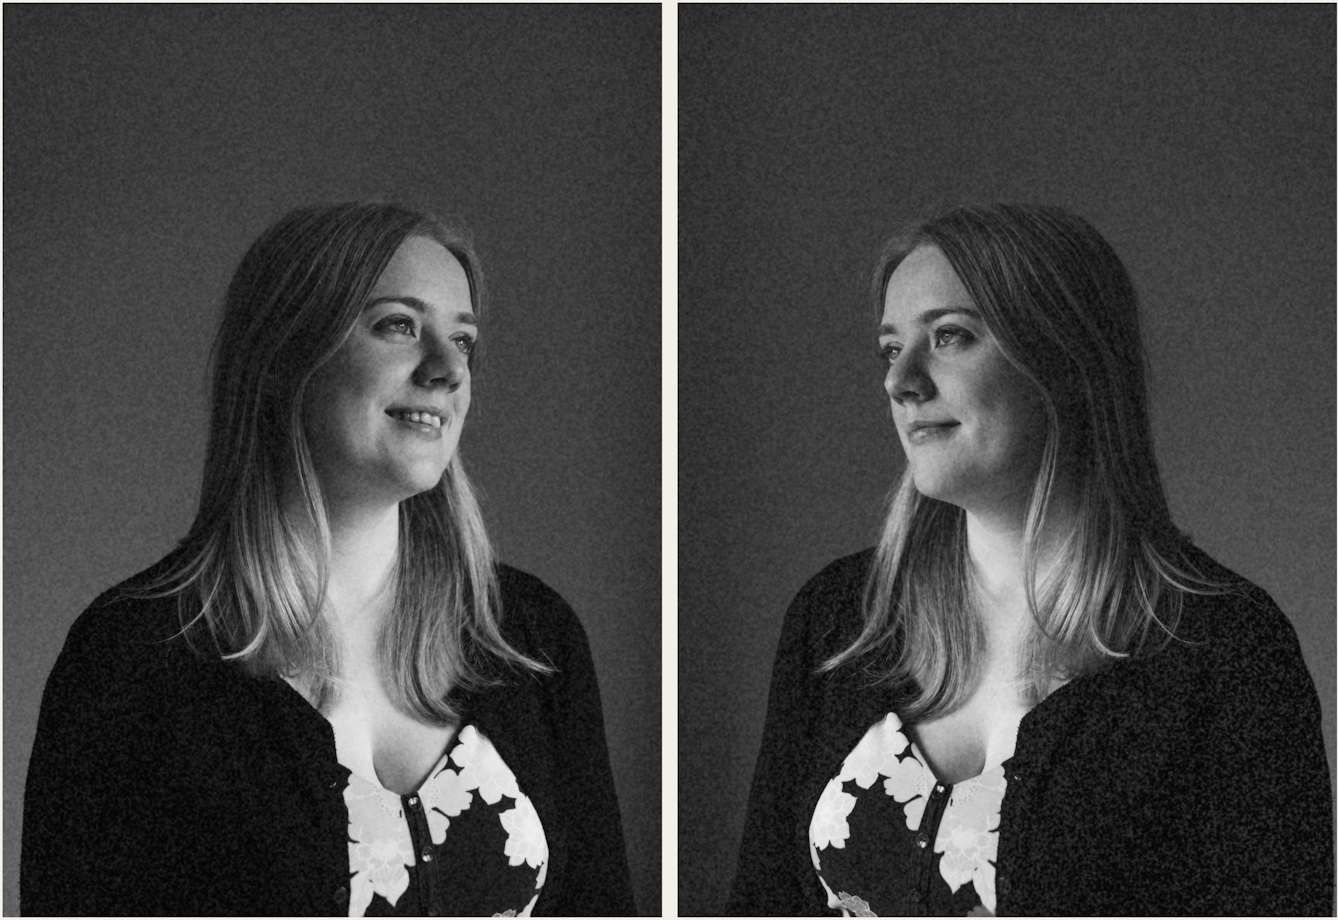 Photographic black and white diptych. The images both show the same young woman with blond hair, wearing a floral dress and black cardigan. In each image she is pictured in profile, looking towards herself in the other image, as if in a mirror. The image is very dark in tone, with just her profile picked out in the light. In the image on the left the woman is smiling. In the image on the right she has a more neutral expression.